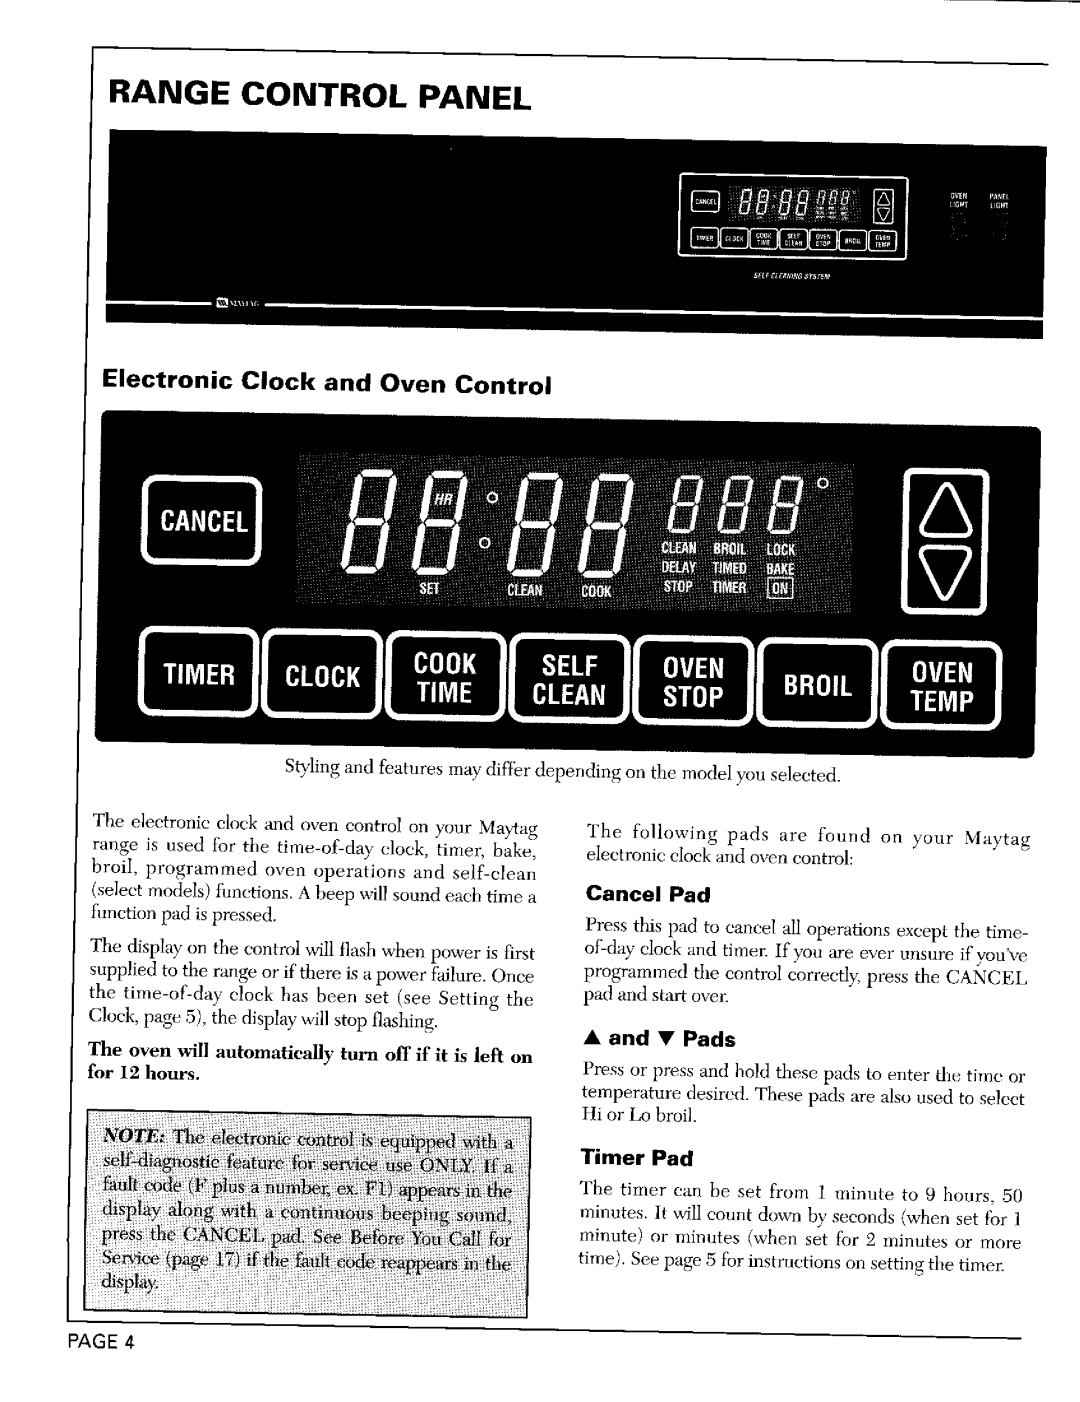 Maytag CRG9800C, CRG7700B Range Control Panel, Electronic Clock and Oven Control, Cancel Pad, •and • Pads, Timer Pad 